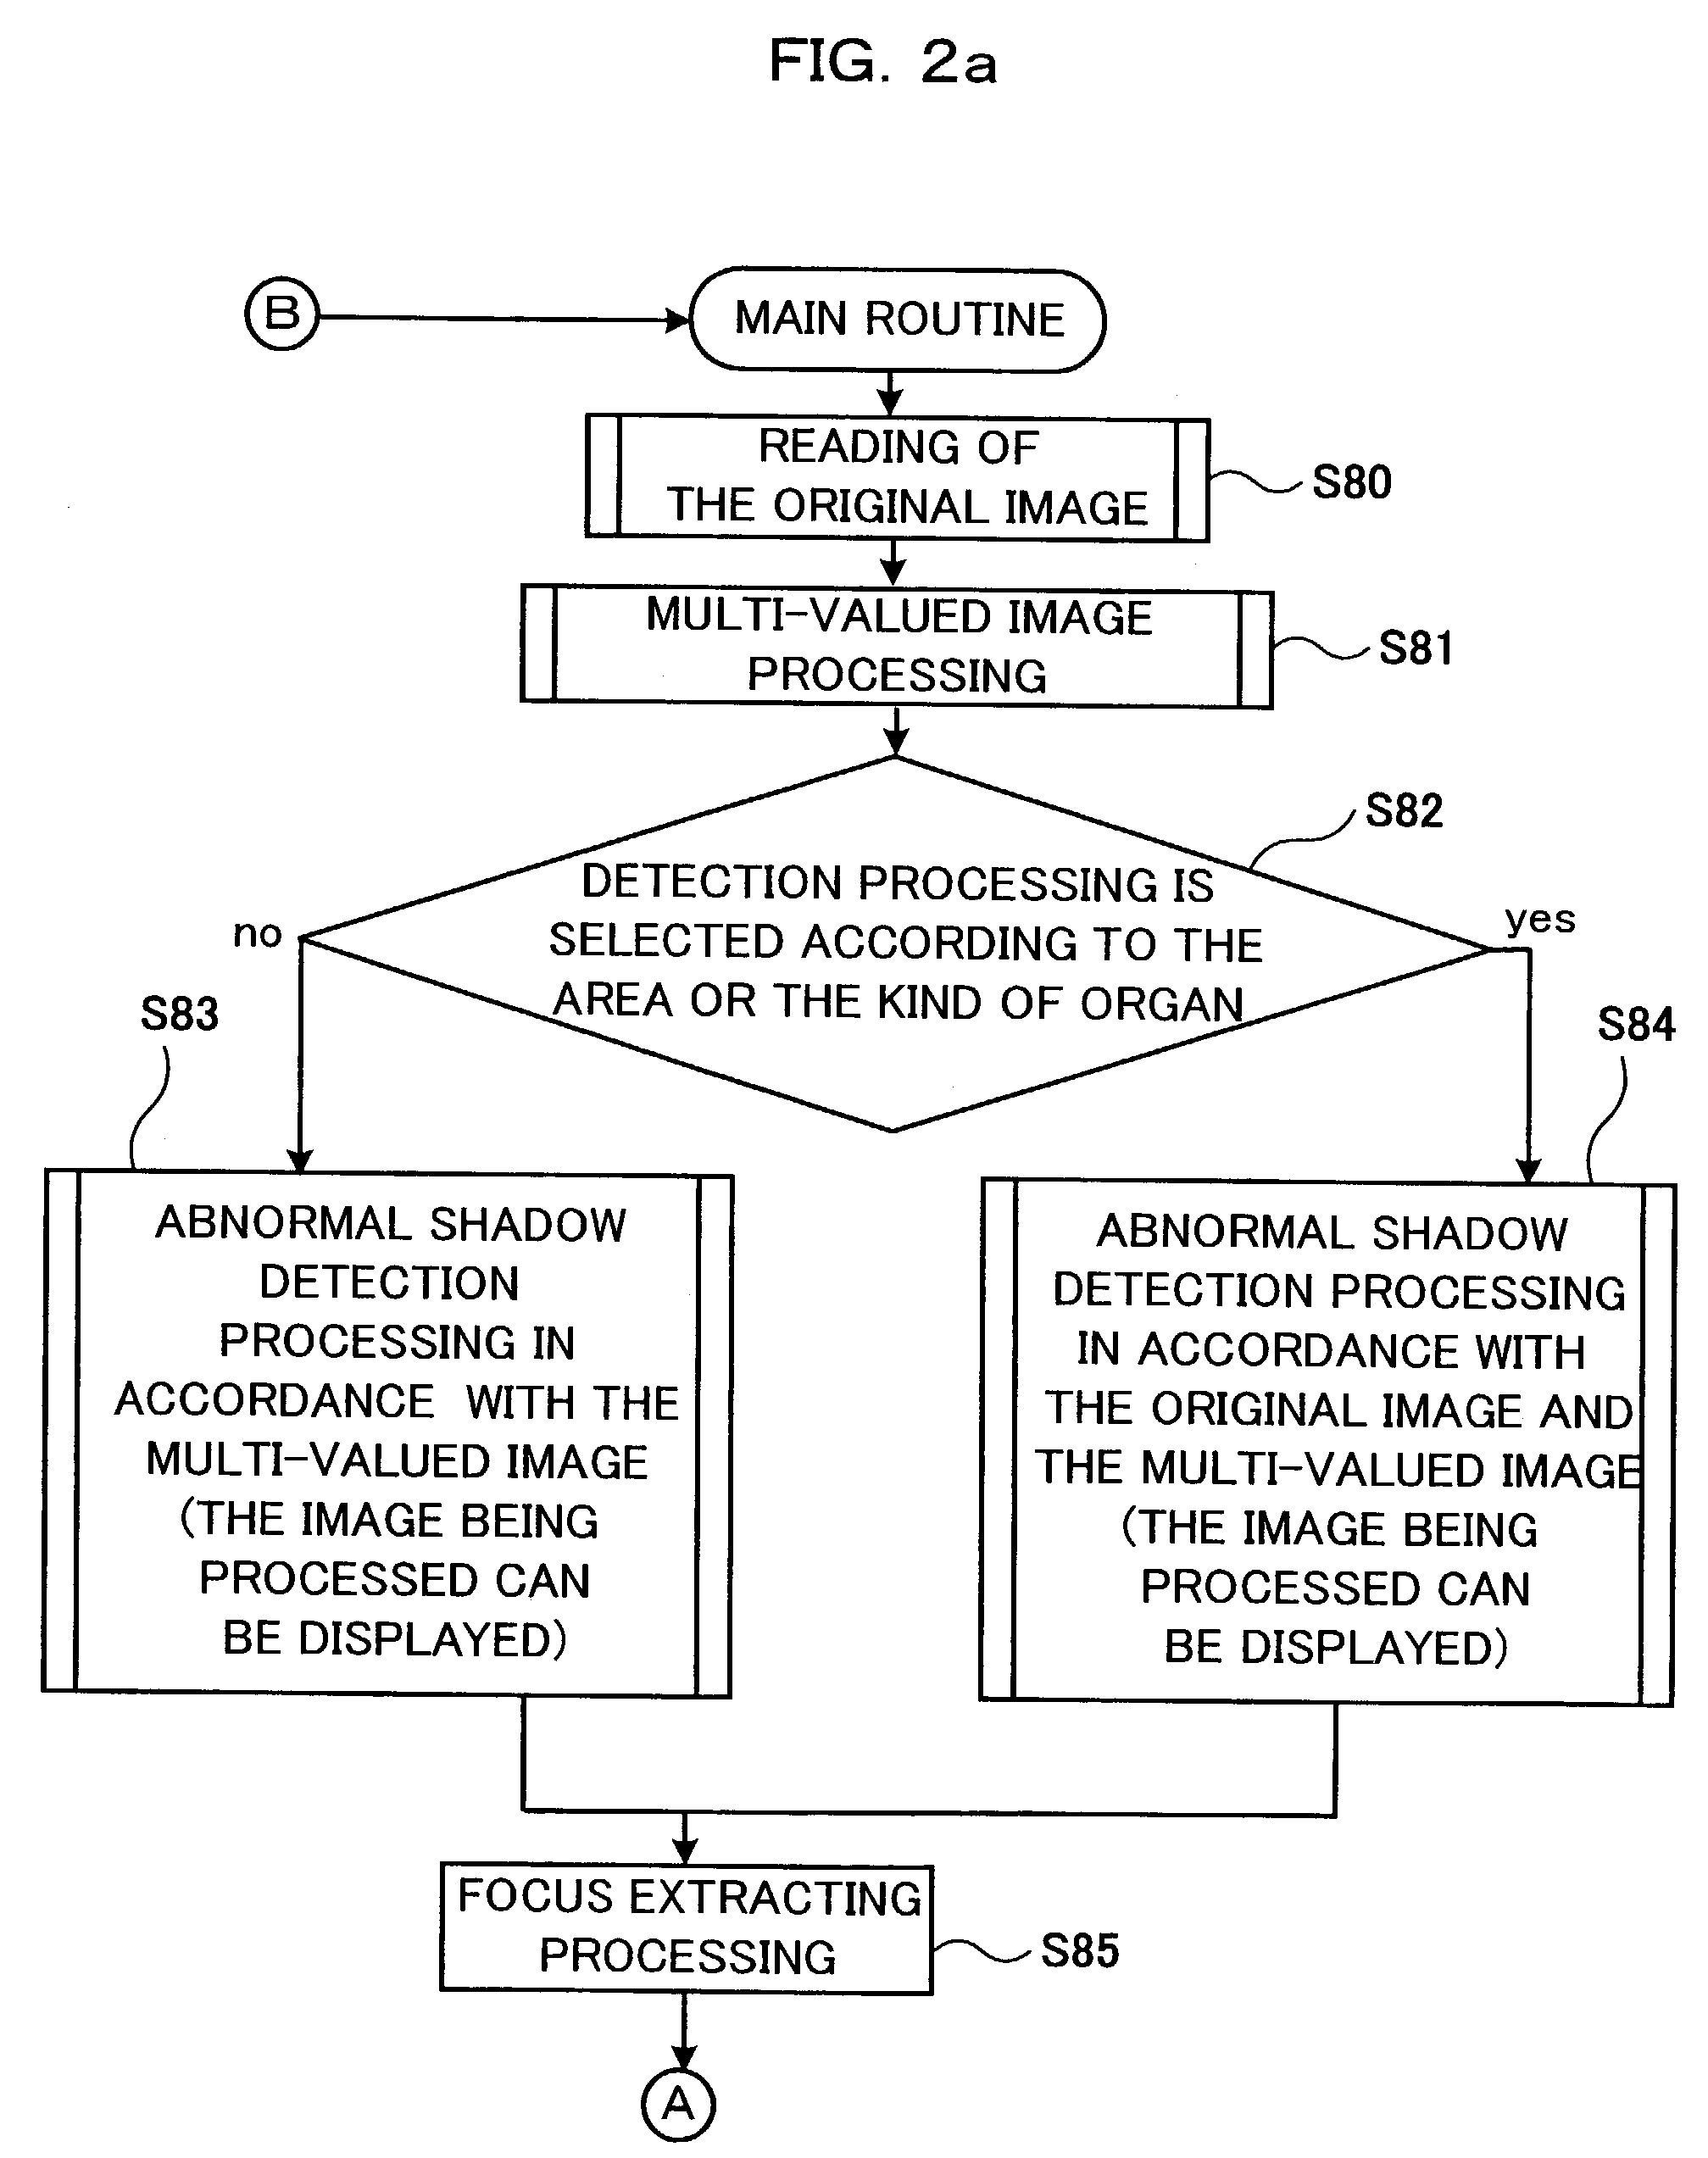 Image diagnosis supporting device